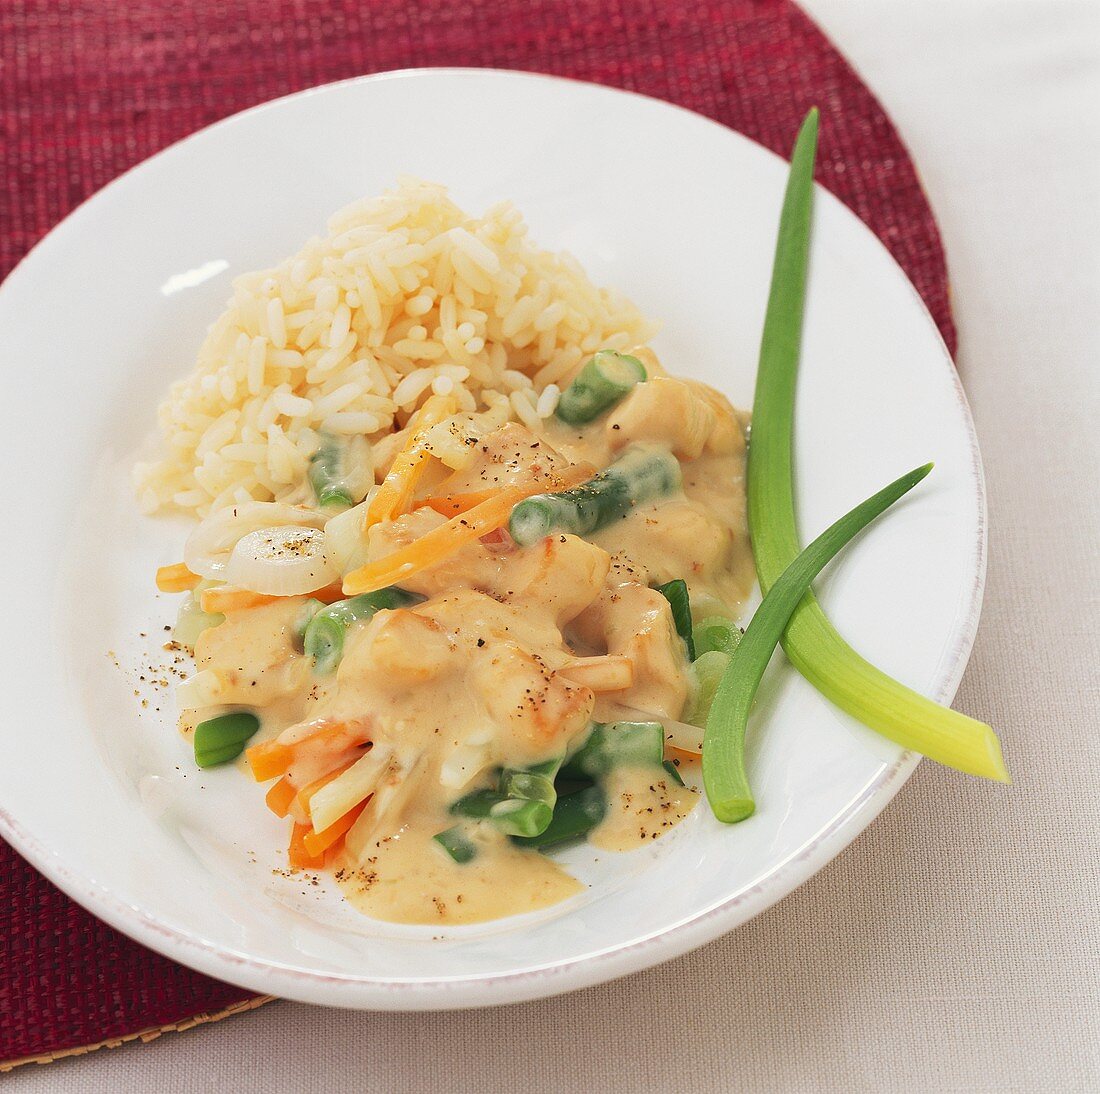 Quick chicken fricassee with vegetables